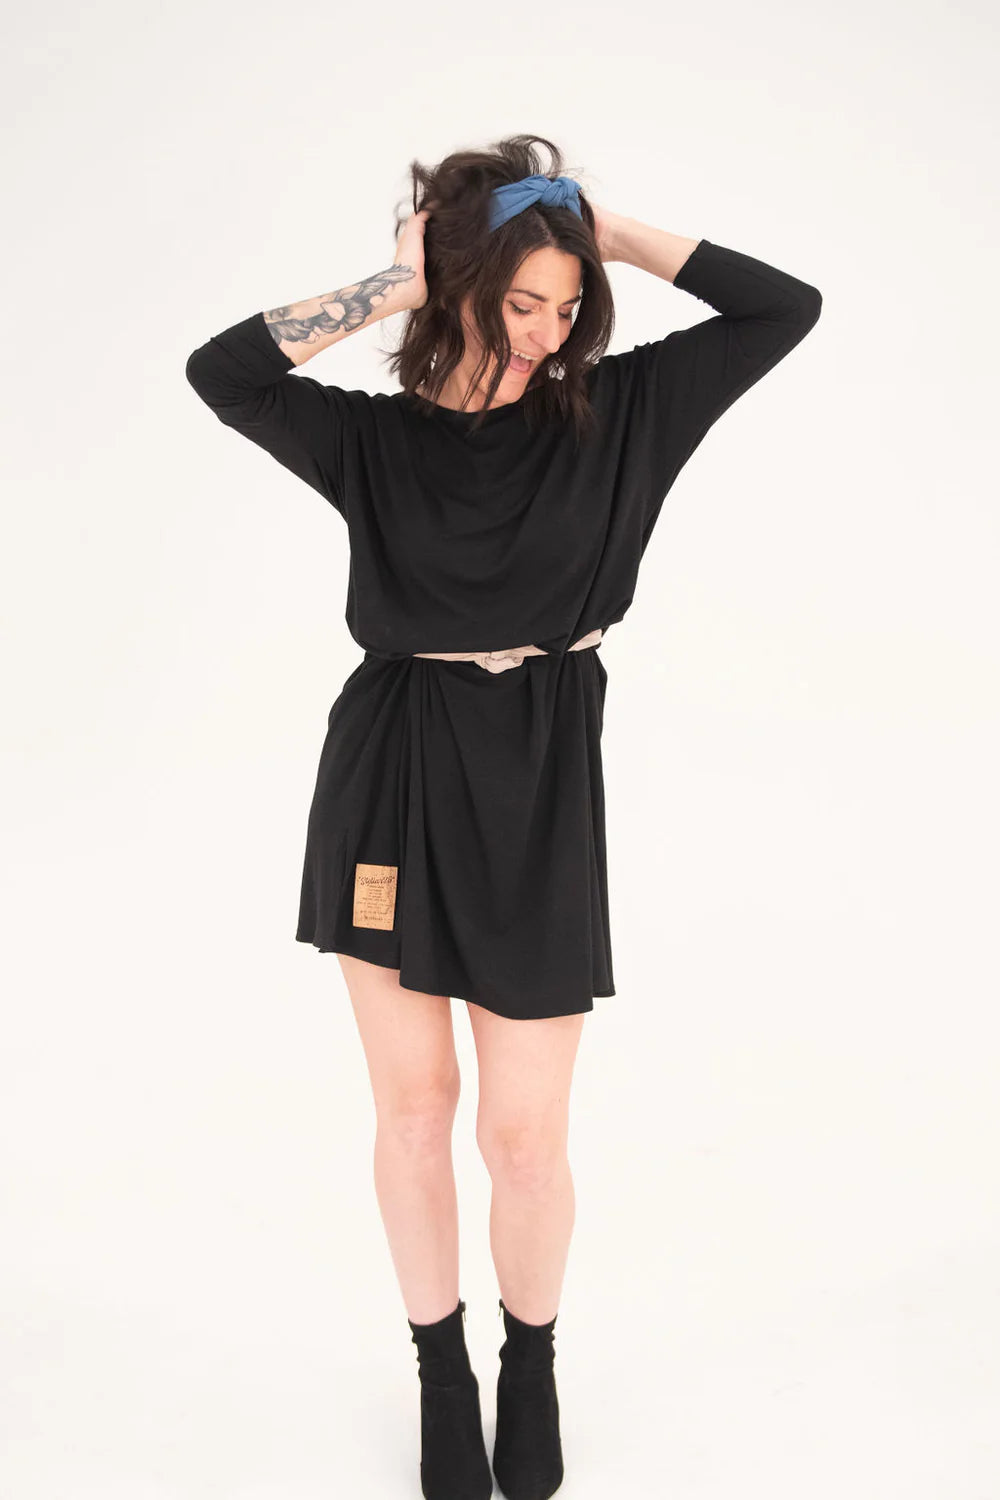 Stellar 25 Dolman Dress -Black- Hometown Style HTS, women's in store and online boutique located in Ingersoll, Ontario